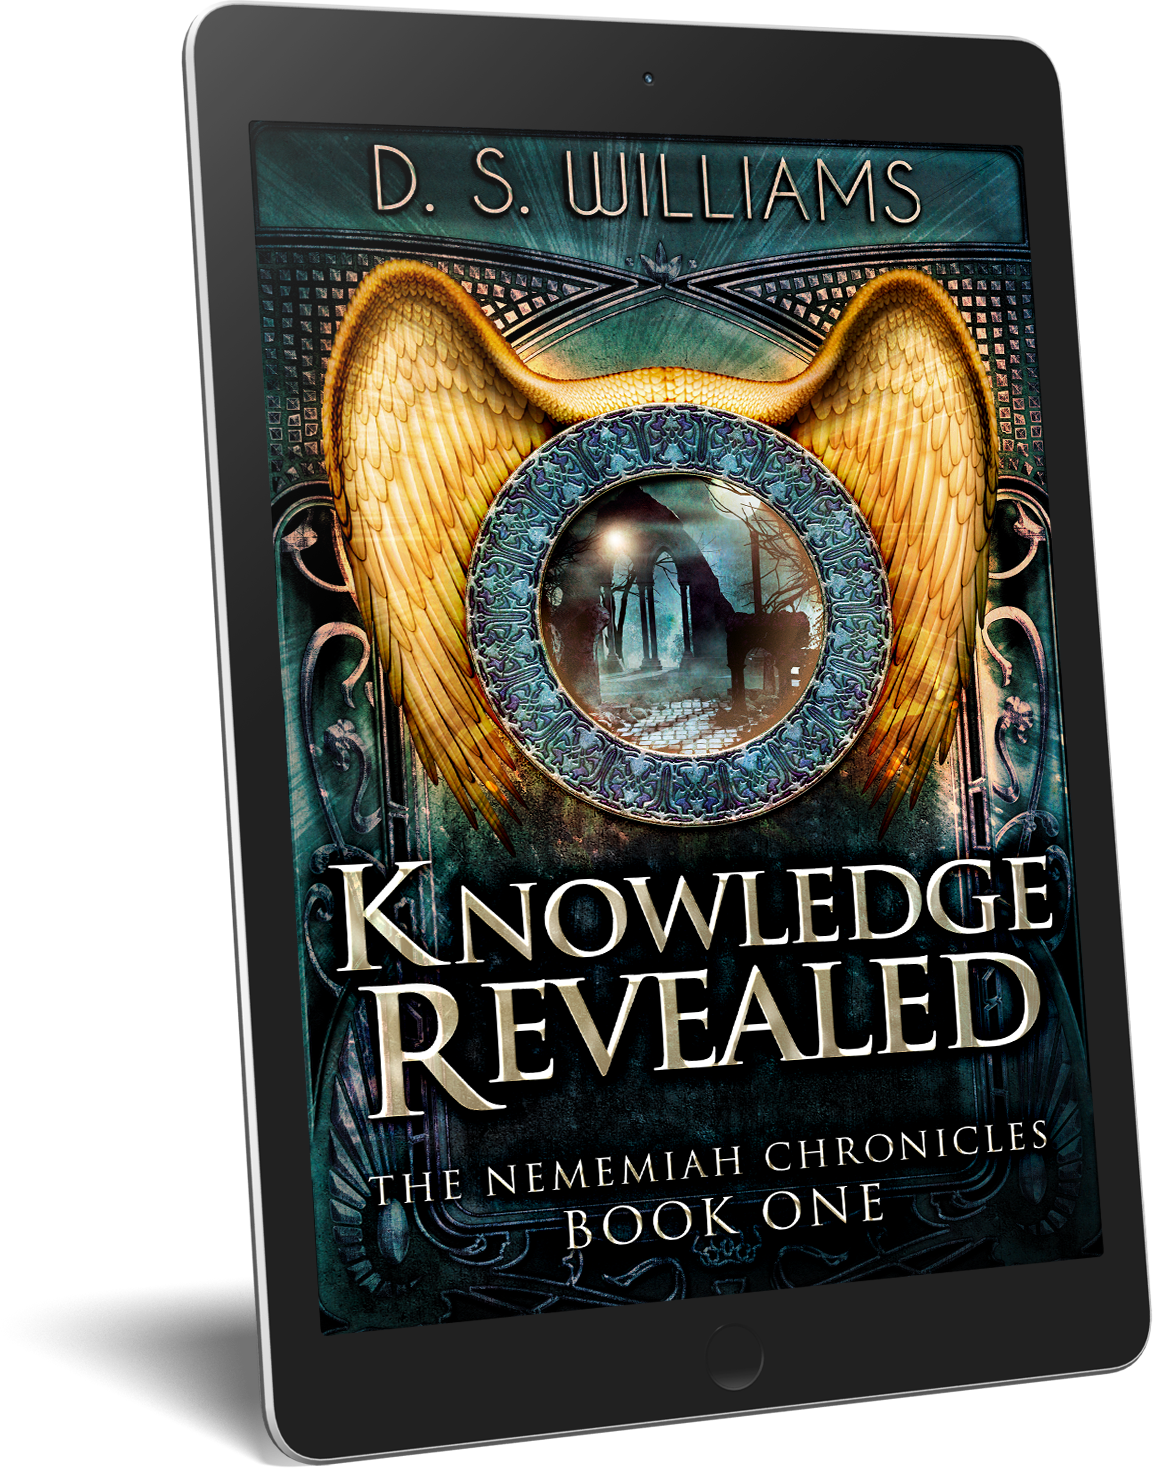 FREE: Knowledge Revealed by D.S. Williams